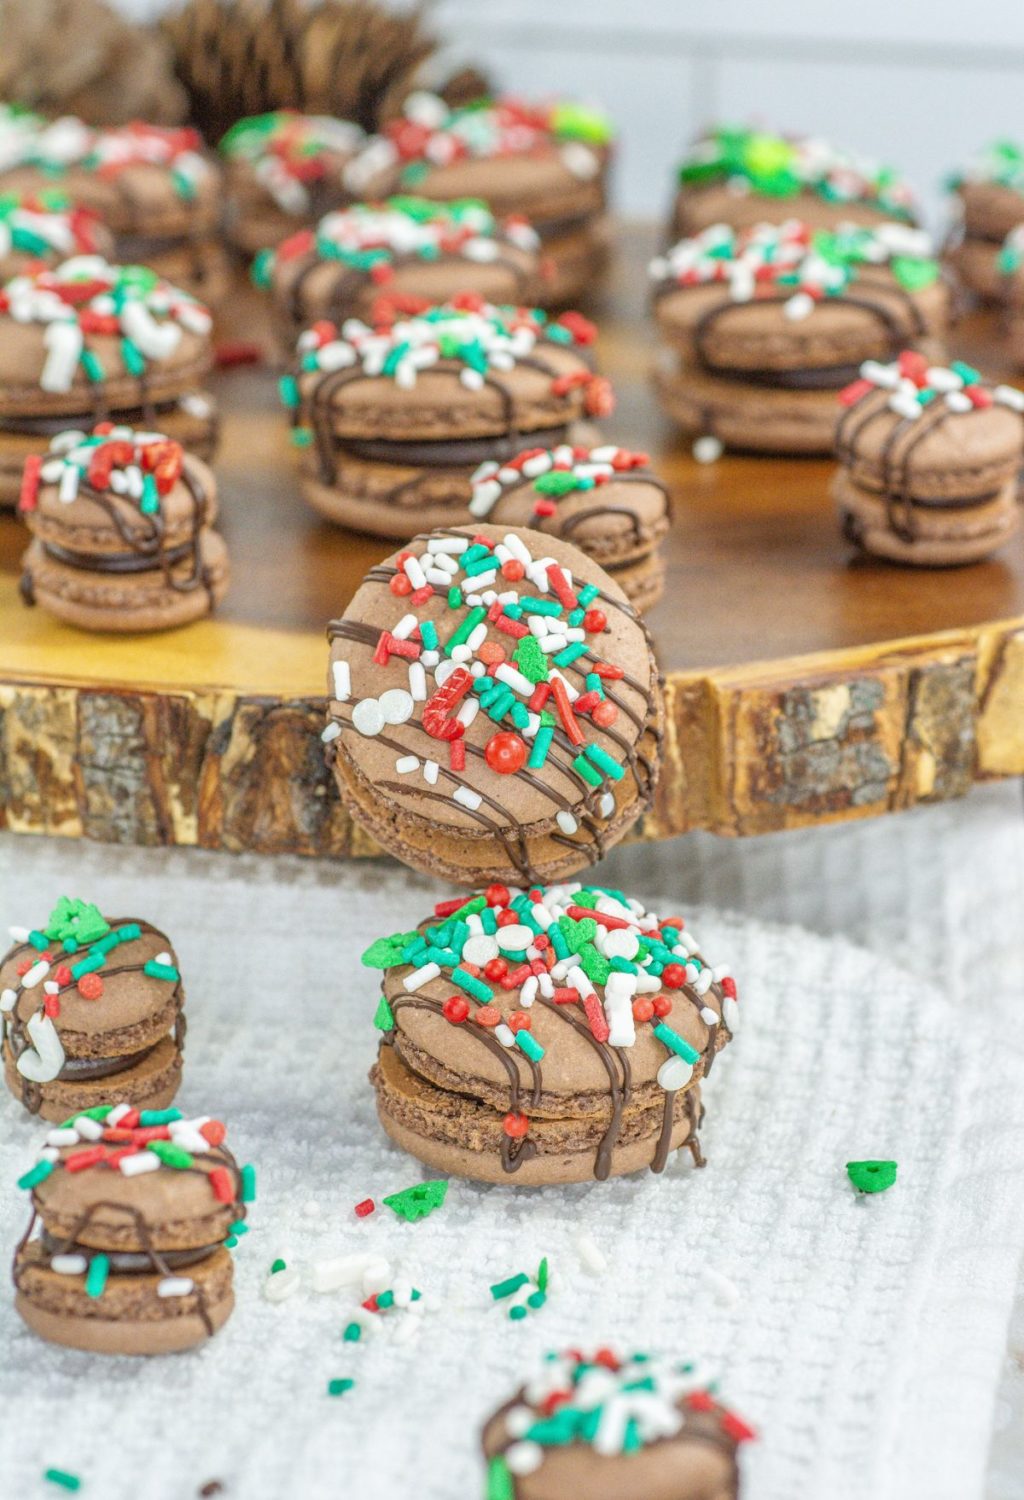 Chocolate macarons with christmas sprinkles on a wooden board.